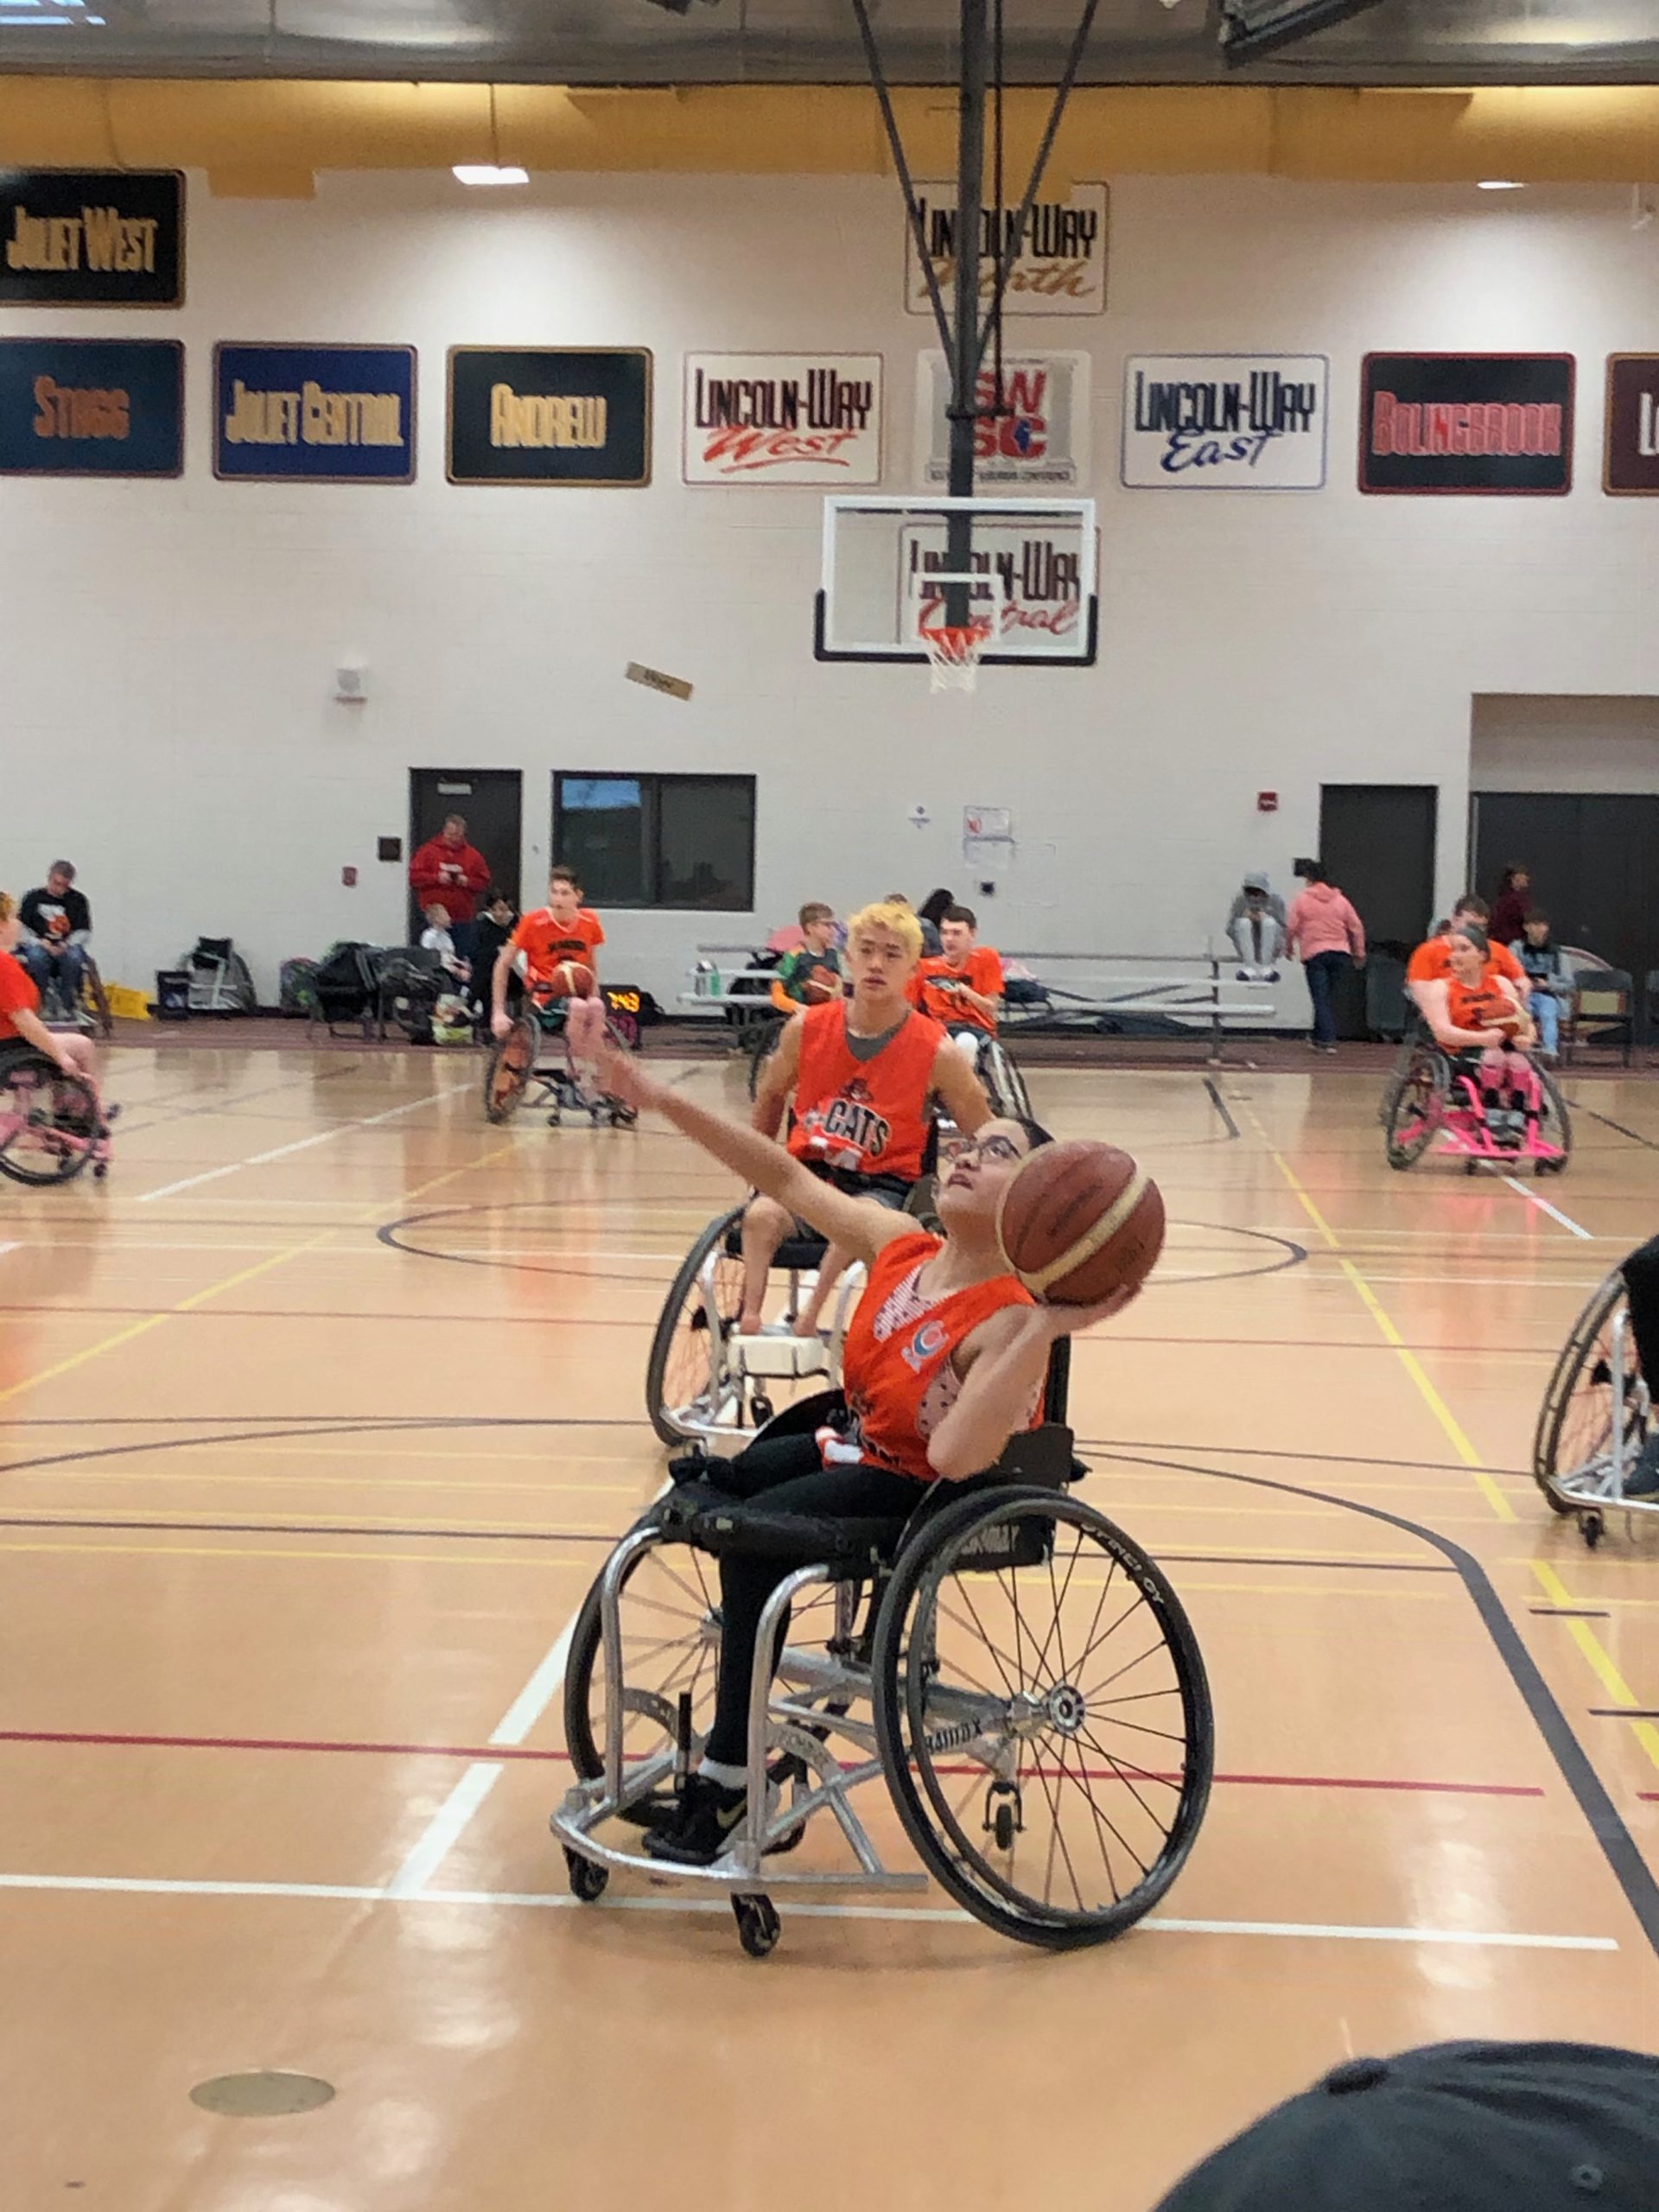 Group of athletes playing wheelchair basketball